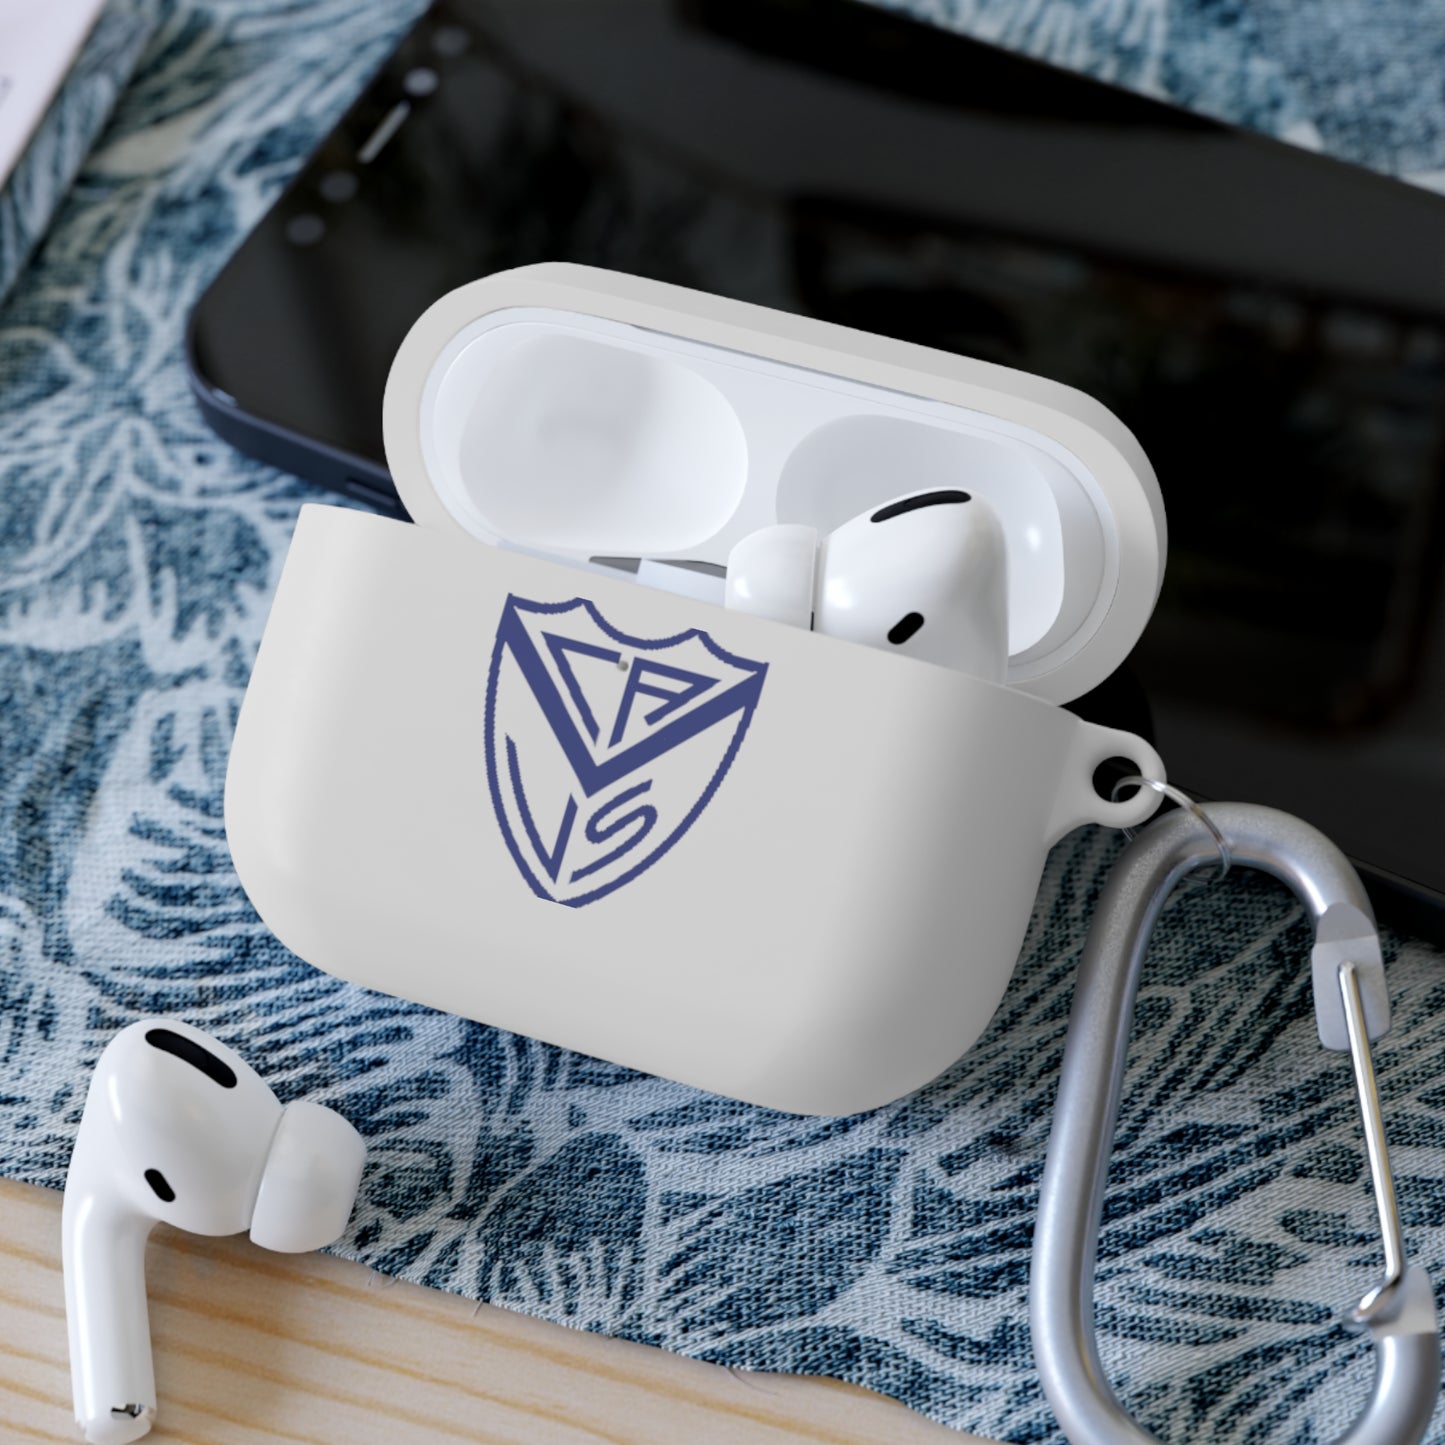 Club Atlético Velez Sarsfield AirPods and AirPods Pro Case Cover